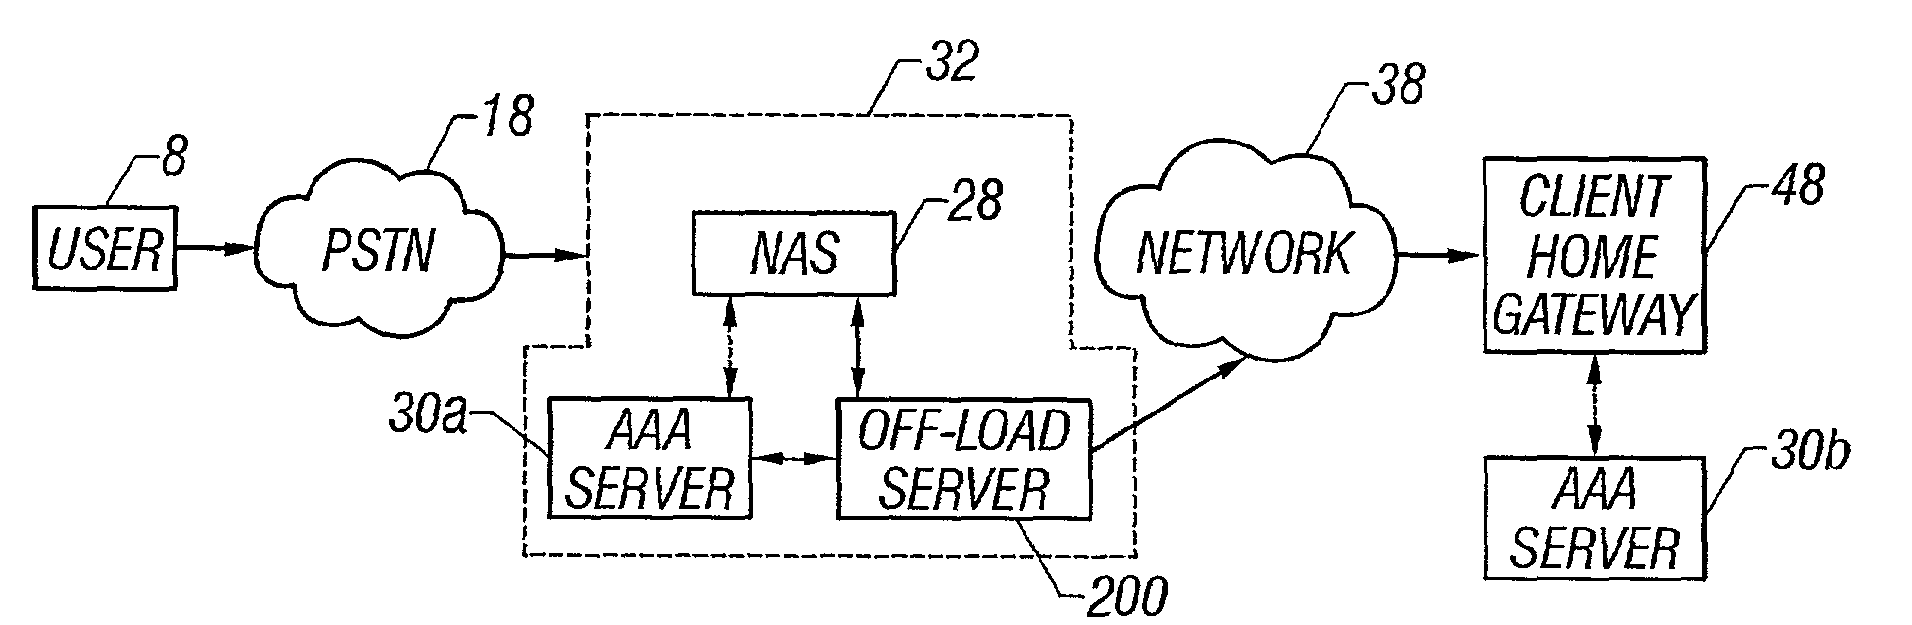 Maintaining a common AAA session id for a call over a network